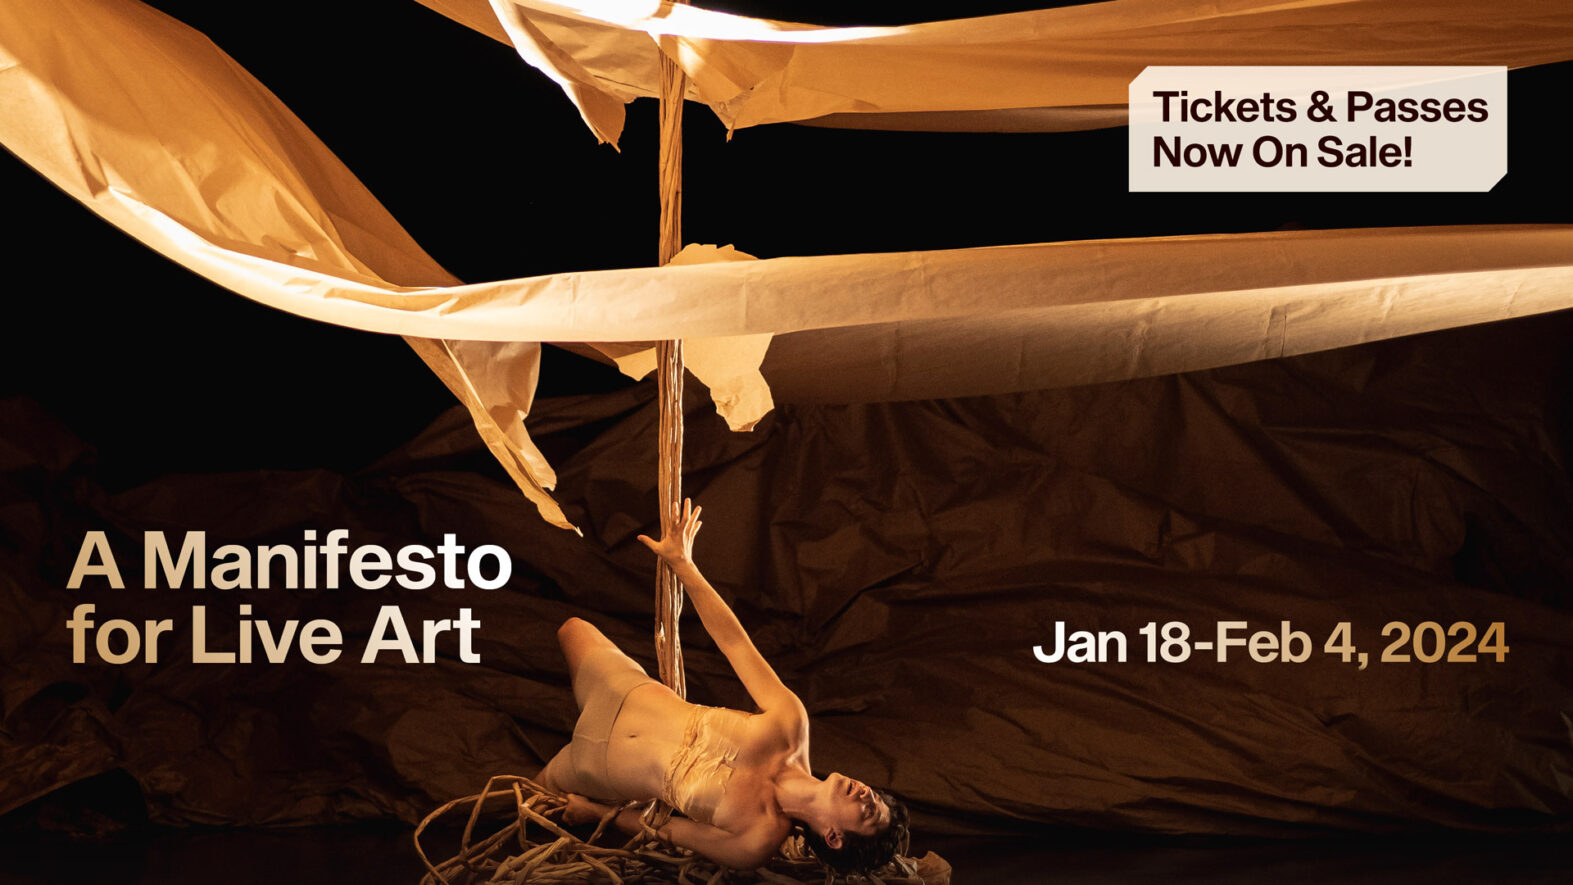 “A manifesto for live art. Tickets and Passes now on sale! Jan 18-Feb 4”. A performer lies on a pile of twisted branches holding up a wooden pole struck through floating layers of paper.